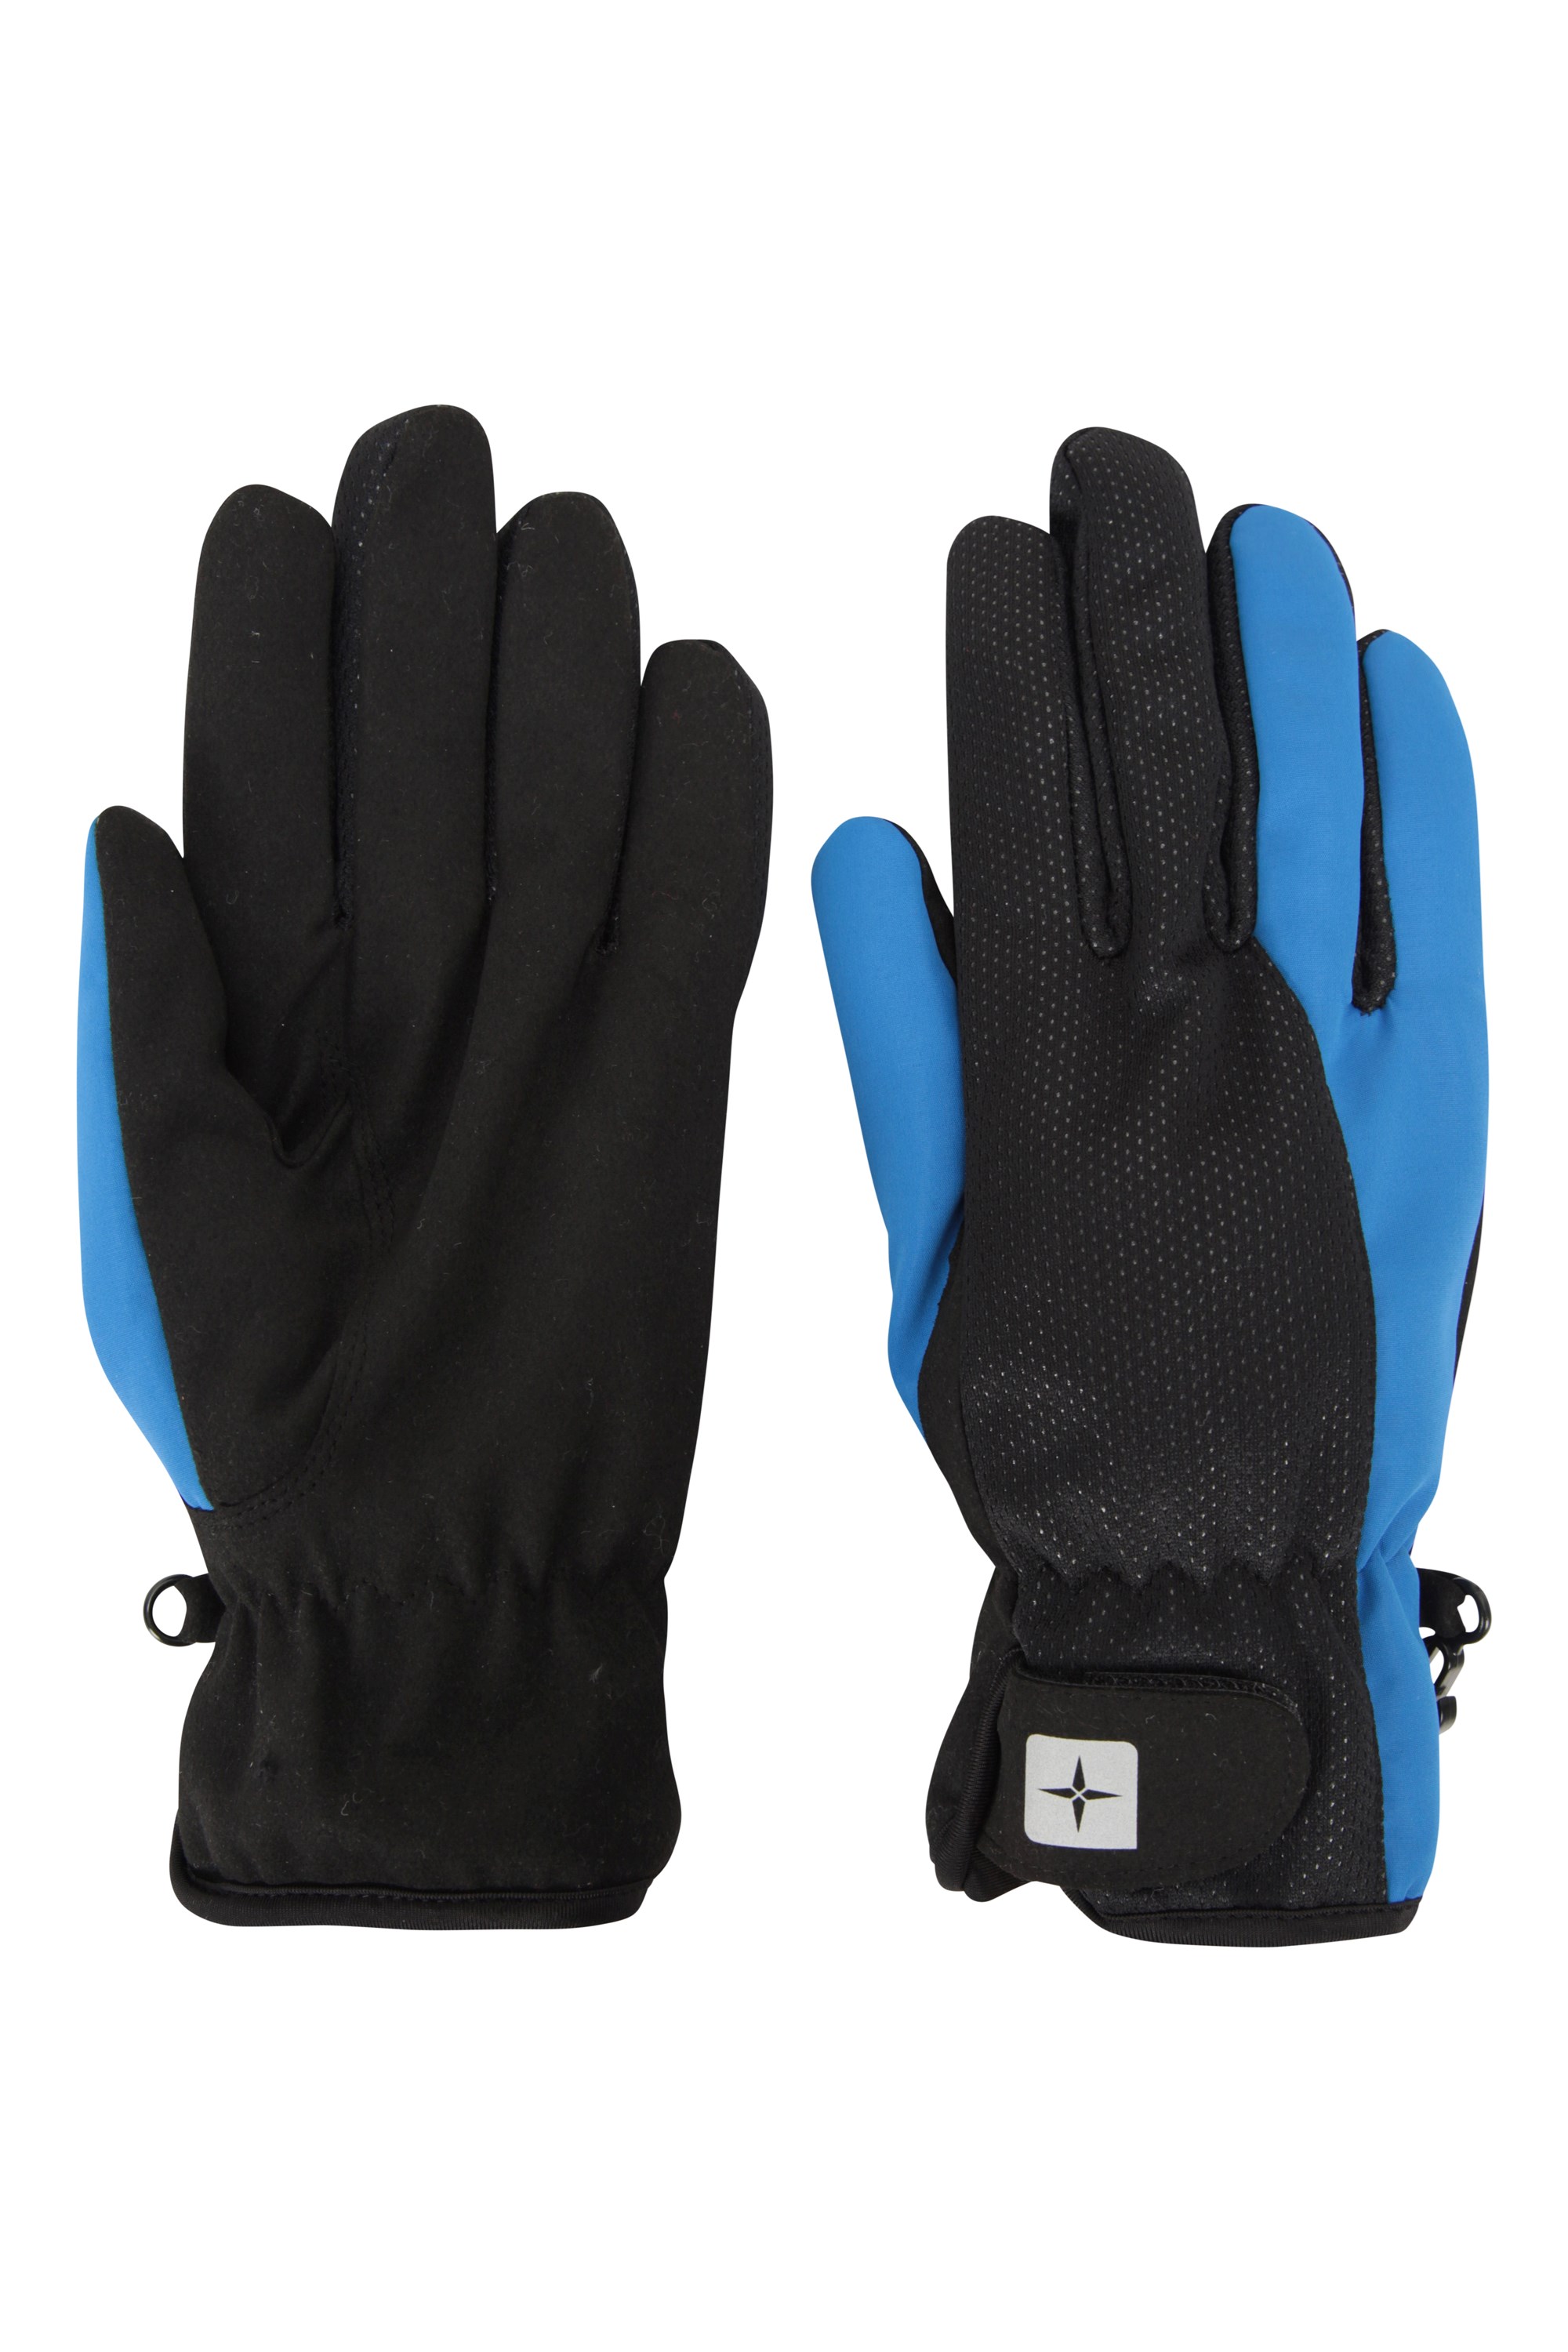 Winter Cycling Gloves - Black